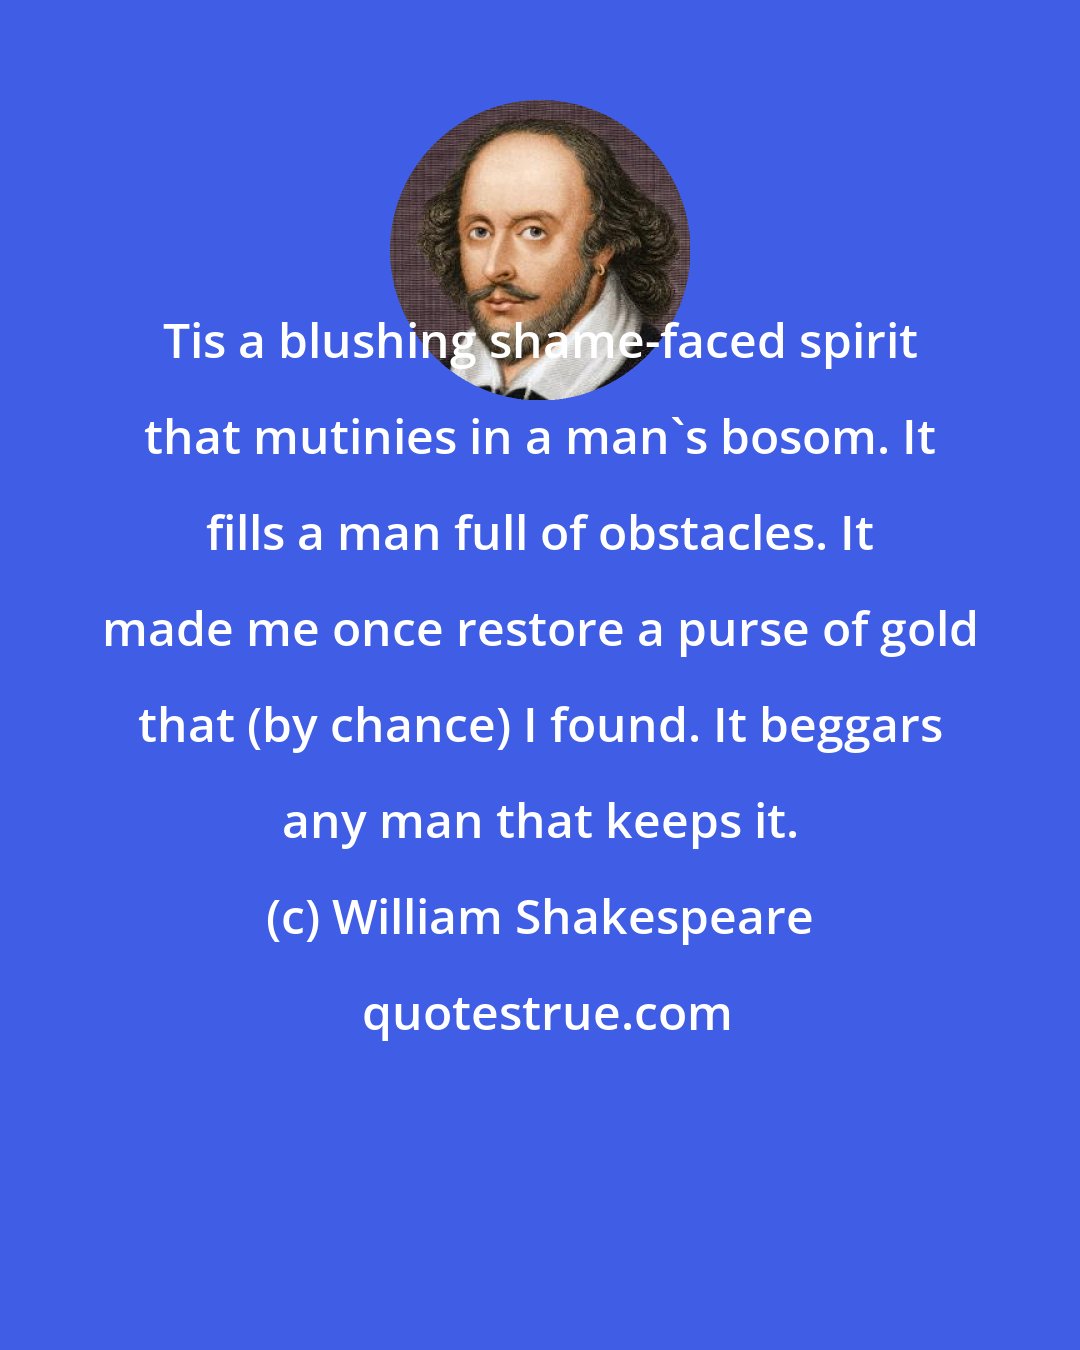 William Shakespeare: Tis a blushing shame-faced spirit that mutinies in a man's bosom. It fills a man full of obstacles. It made me once restore a purse of gold that (by chance) I found. It beggars any man that keeps it.